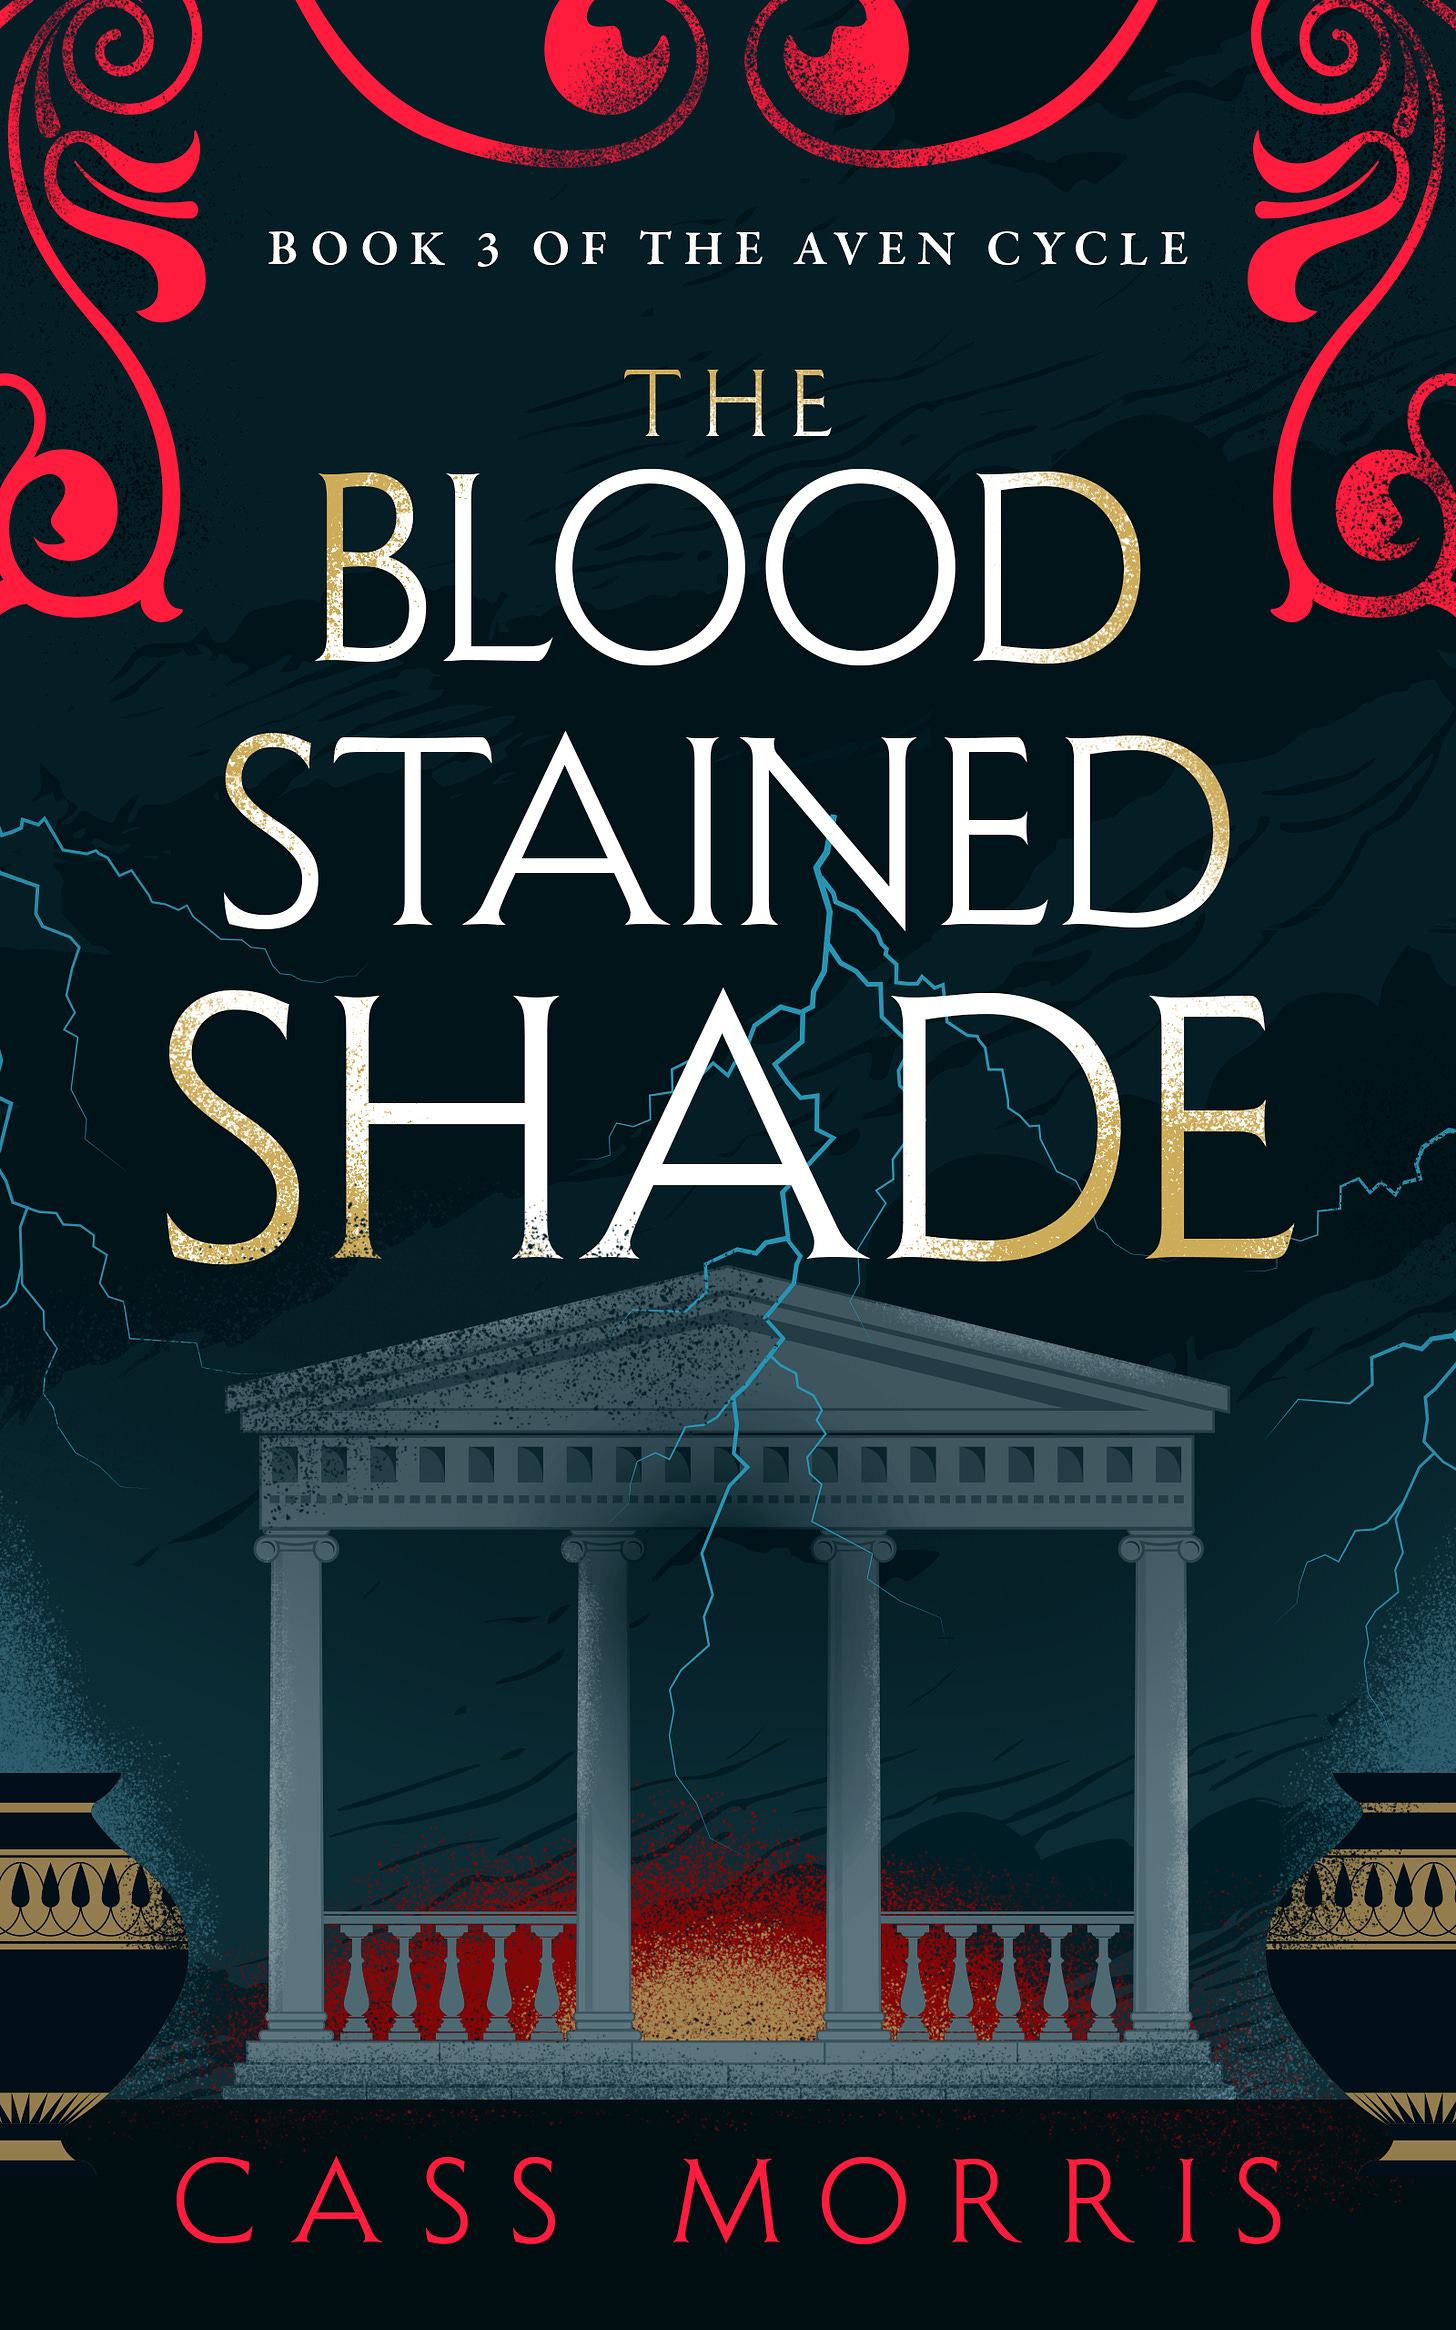 Book cover: THE BLOODSTAINED SHADE: gold text and red filigree on a black background; central image of a temple and dark clouds split by lightning